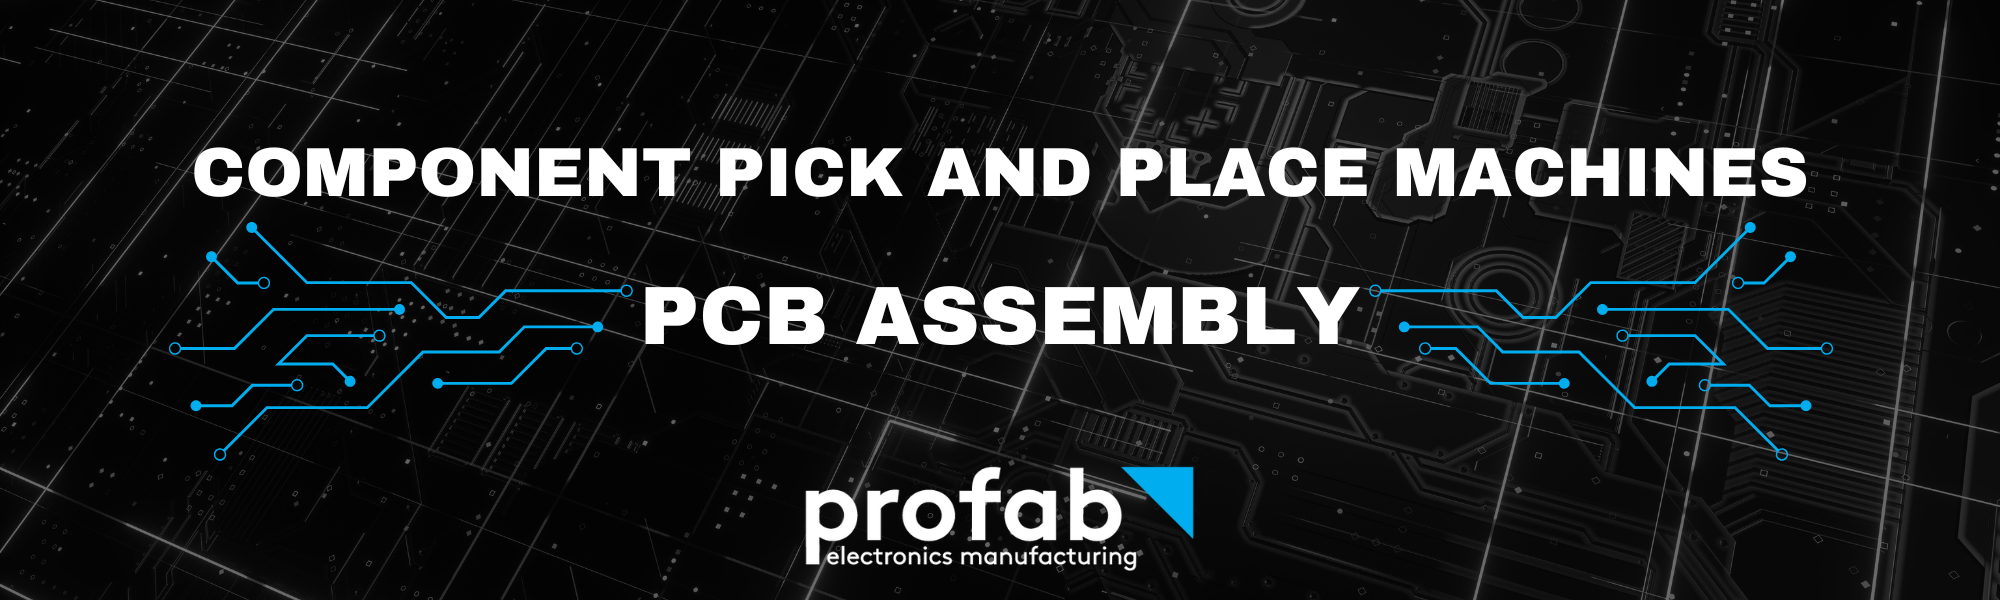 PCB Assembly Component Pick and Place Machines